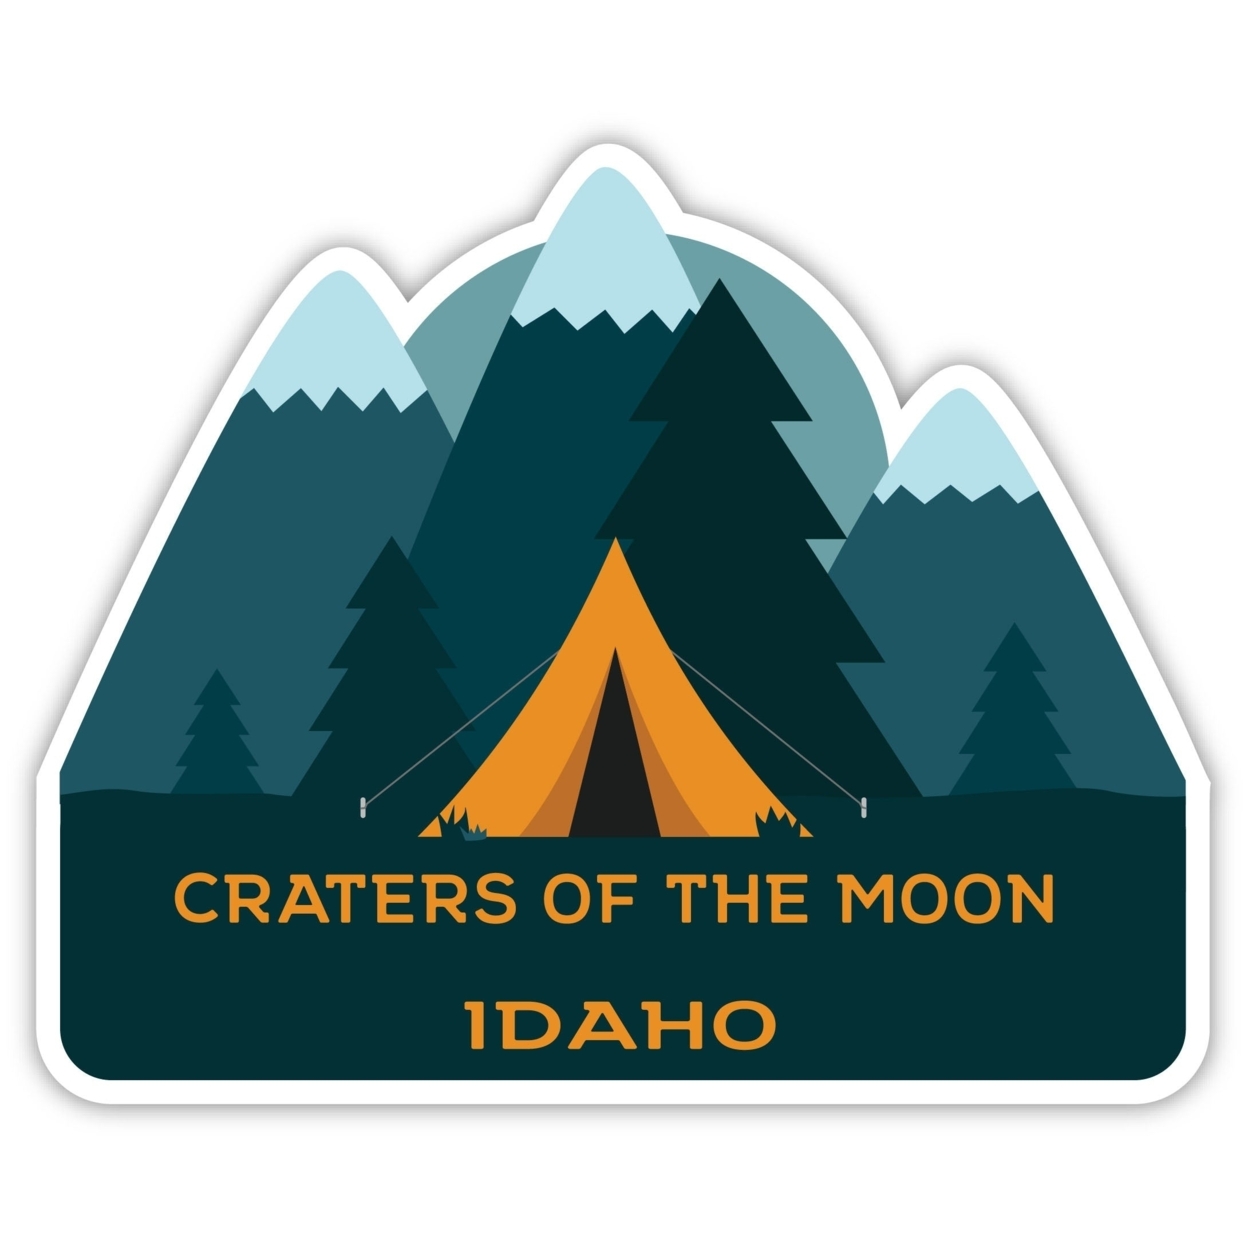 Craters Of The Moon Idaho Souvenir Decorative Stickers (Choose Theme And Size) - 4-Pack, 8-Inch, Bear